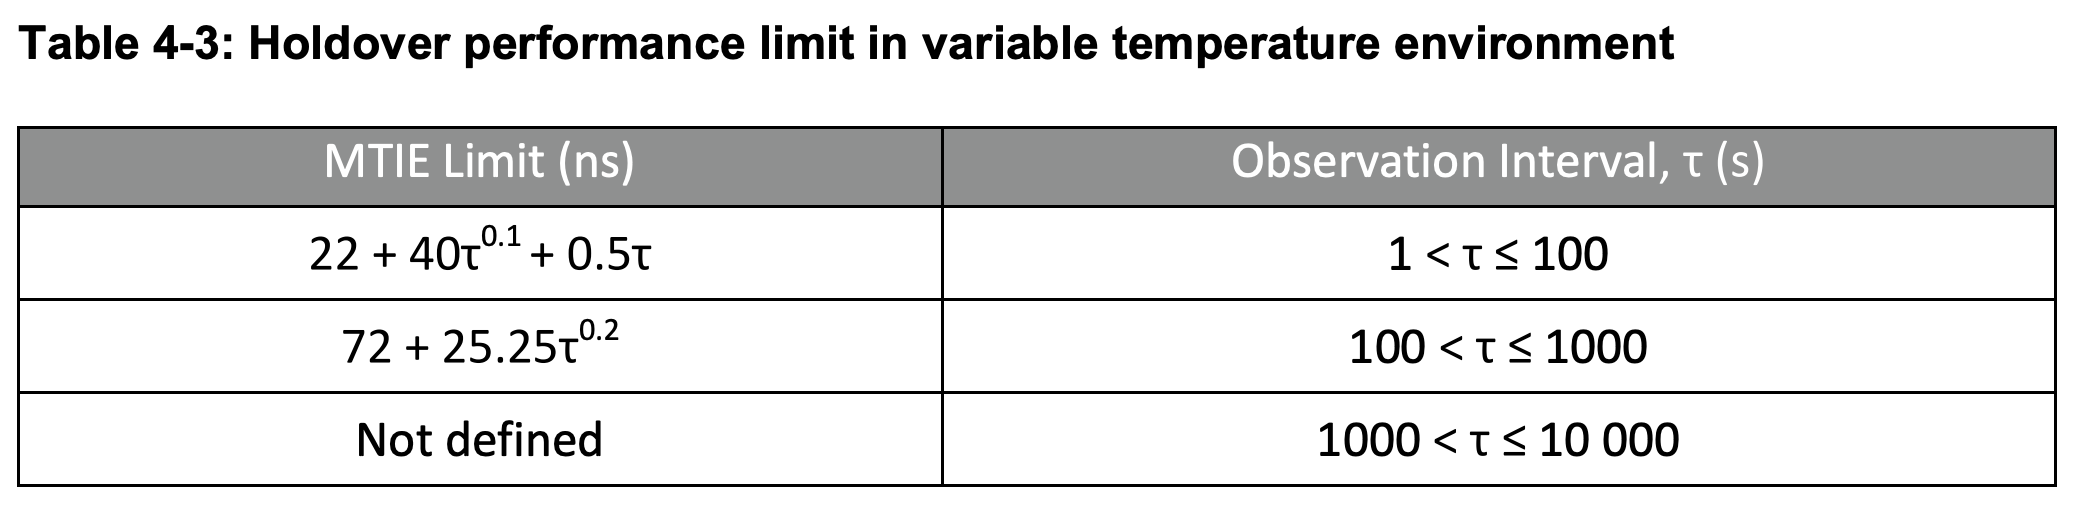 Table 4-3 Holdover performance limit in variable temperature environment